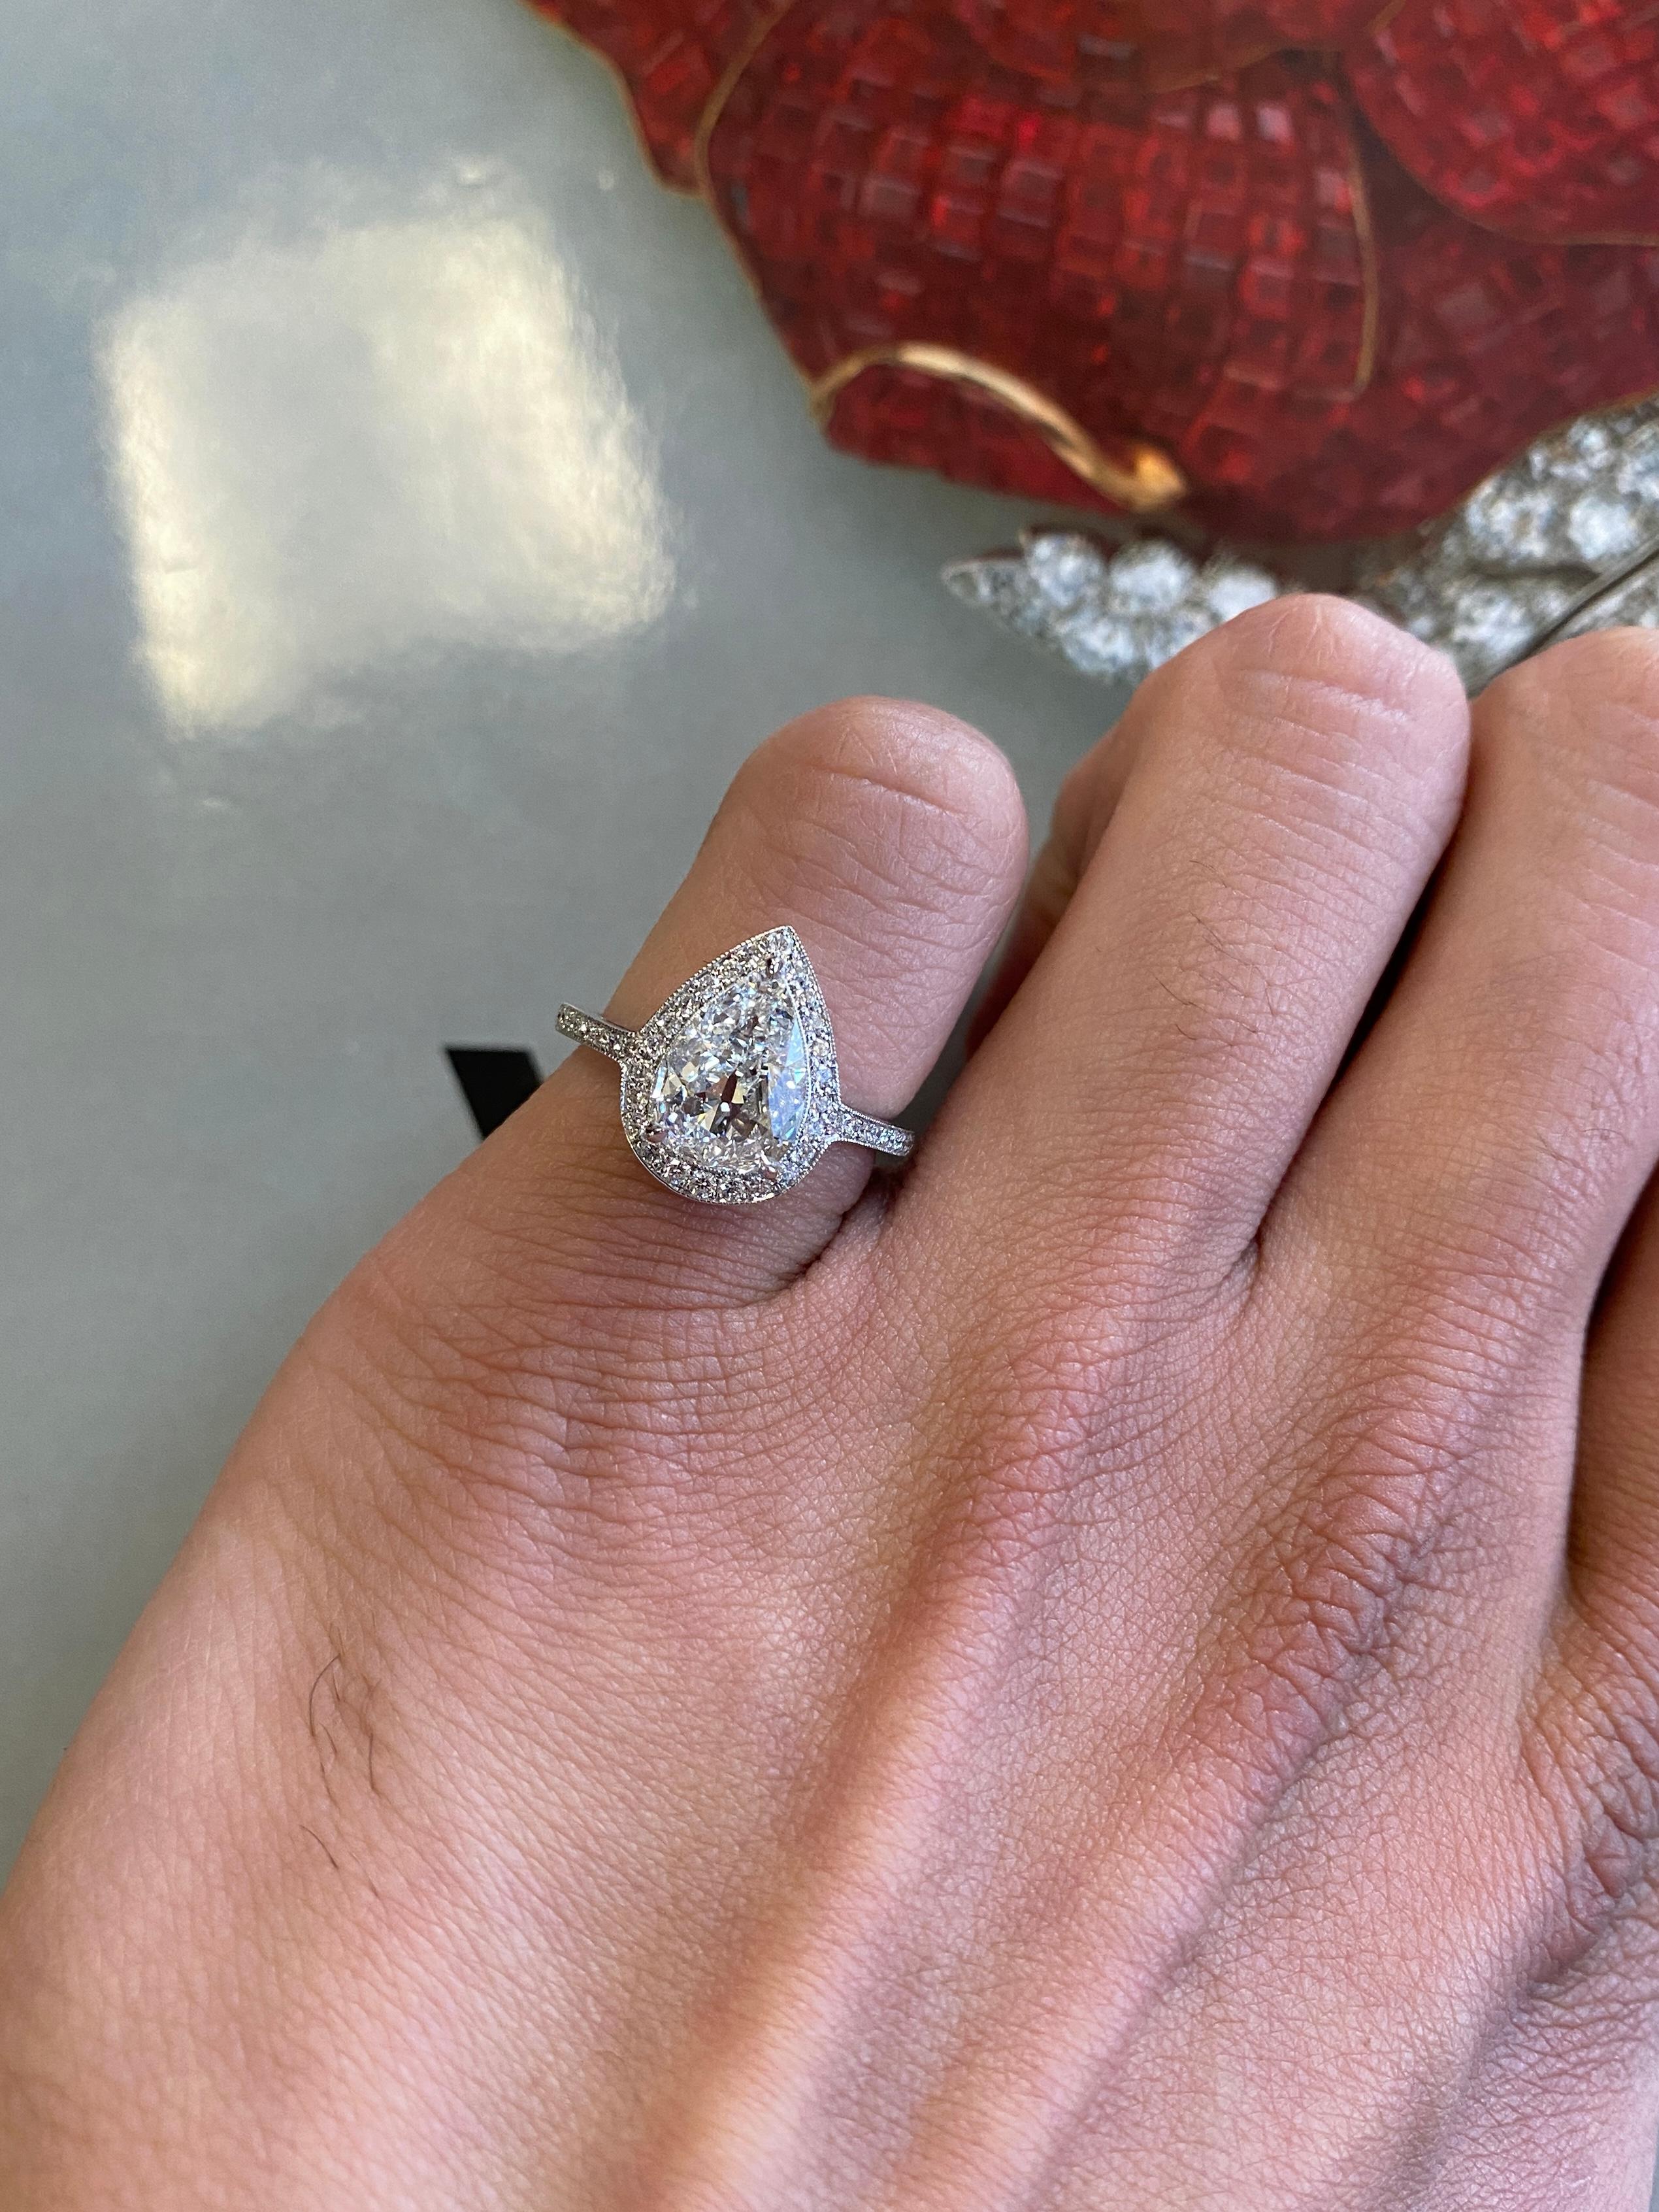 With its open culet and distinctive charm of an old stone, the stunning antique-cut pear shape in this ring is a testament to the craftsmanship and artistry of a bygone era, and highlights the unique beauty and character of antique diamonds. The